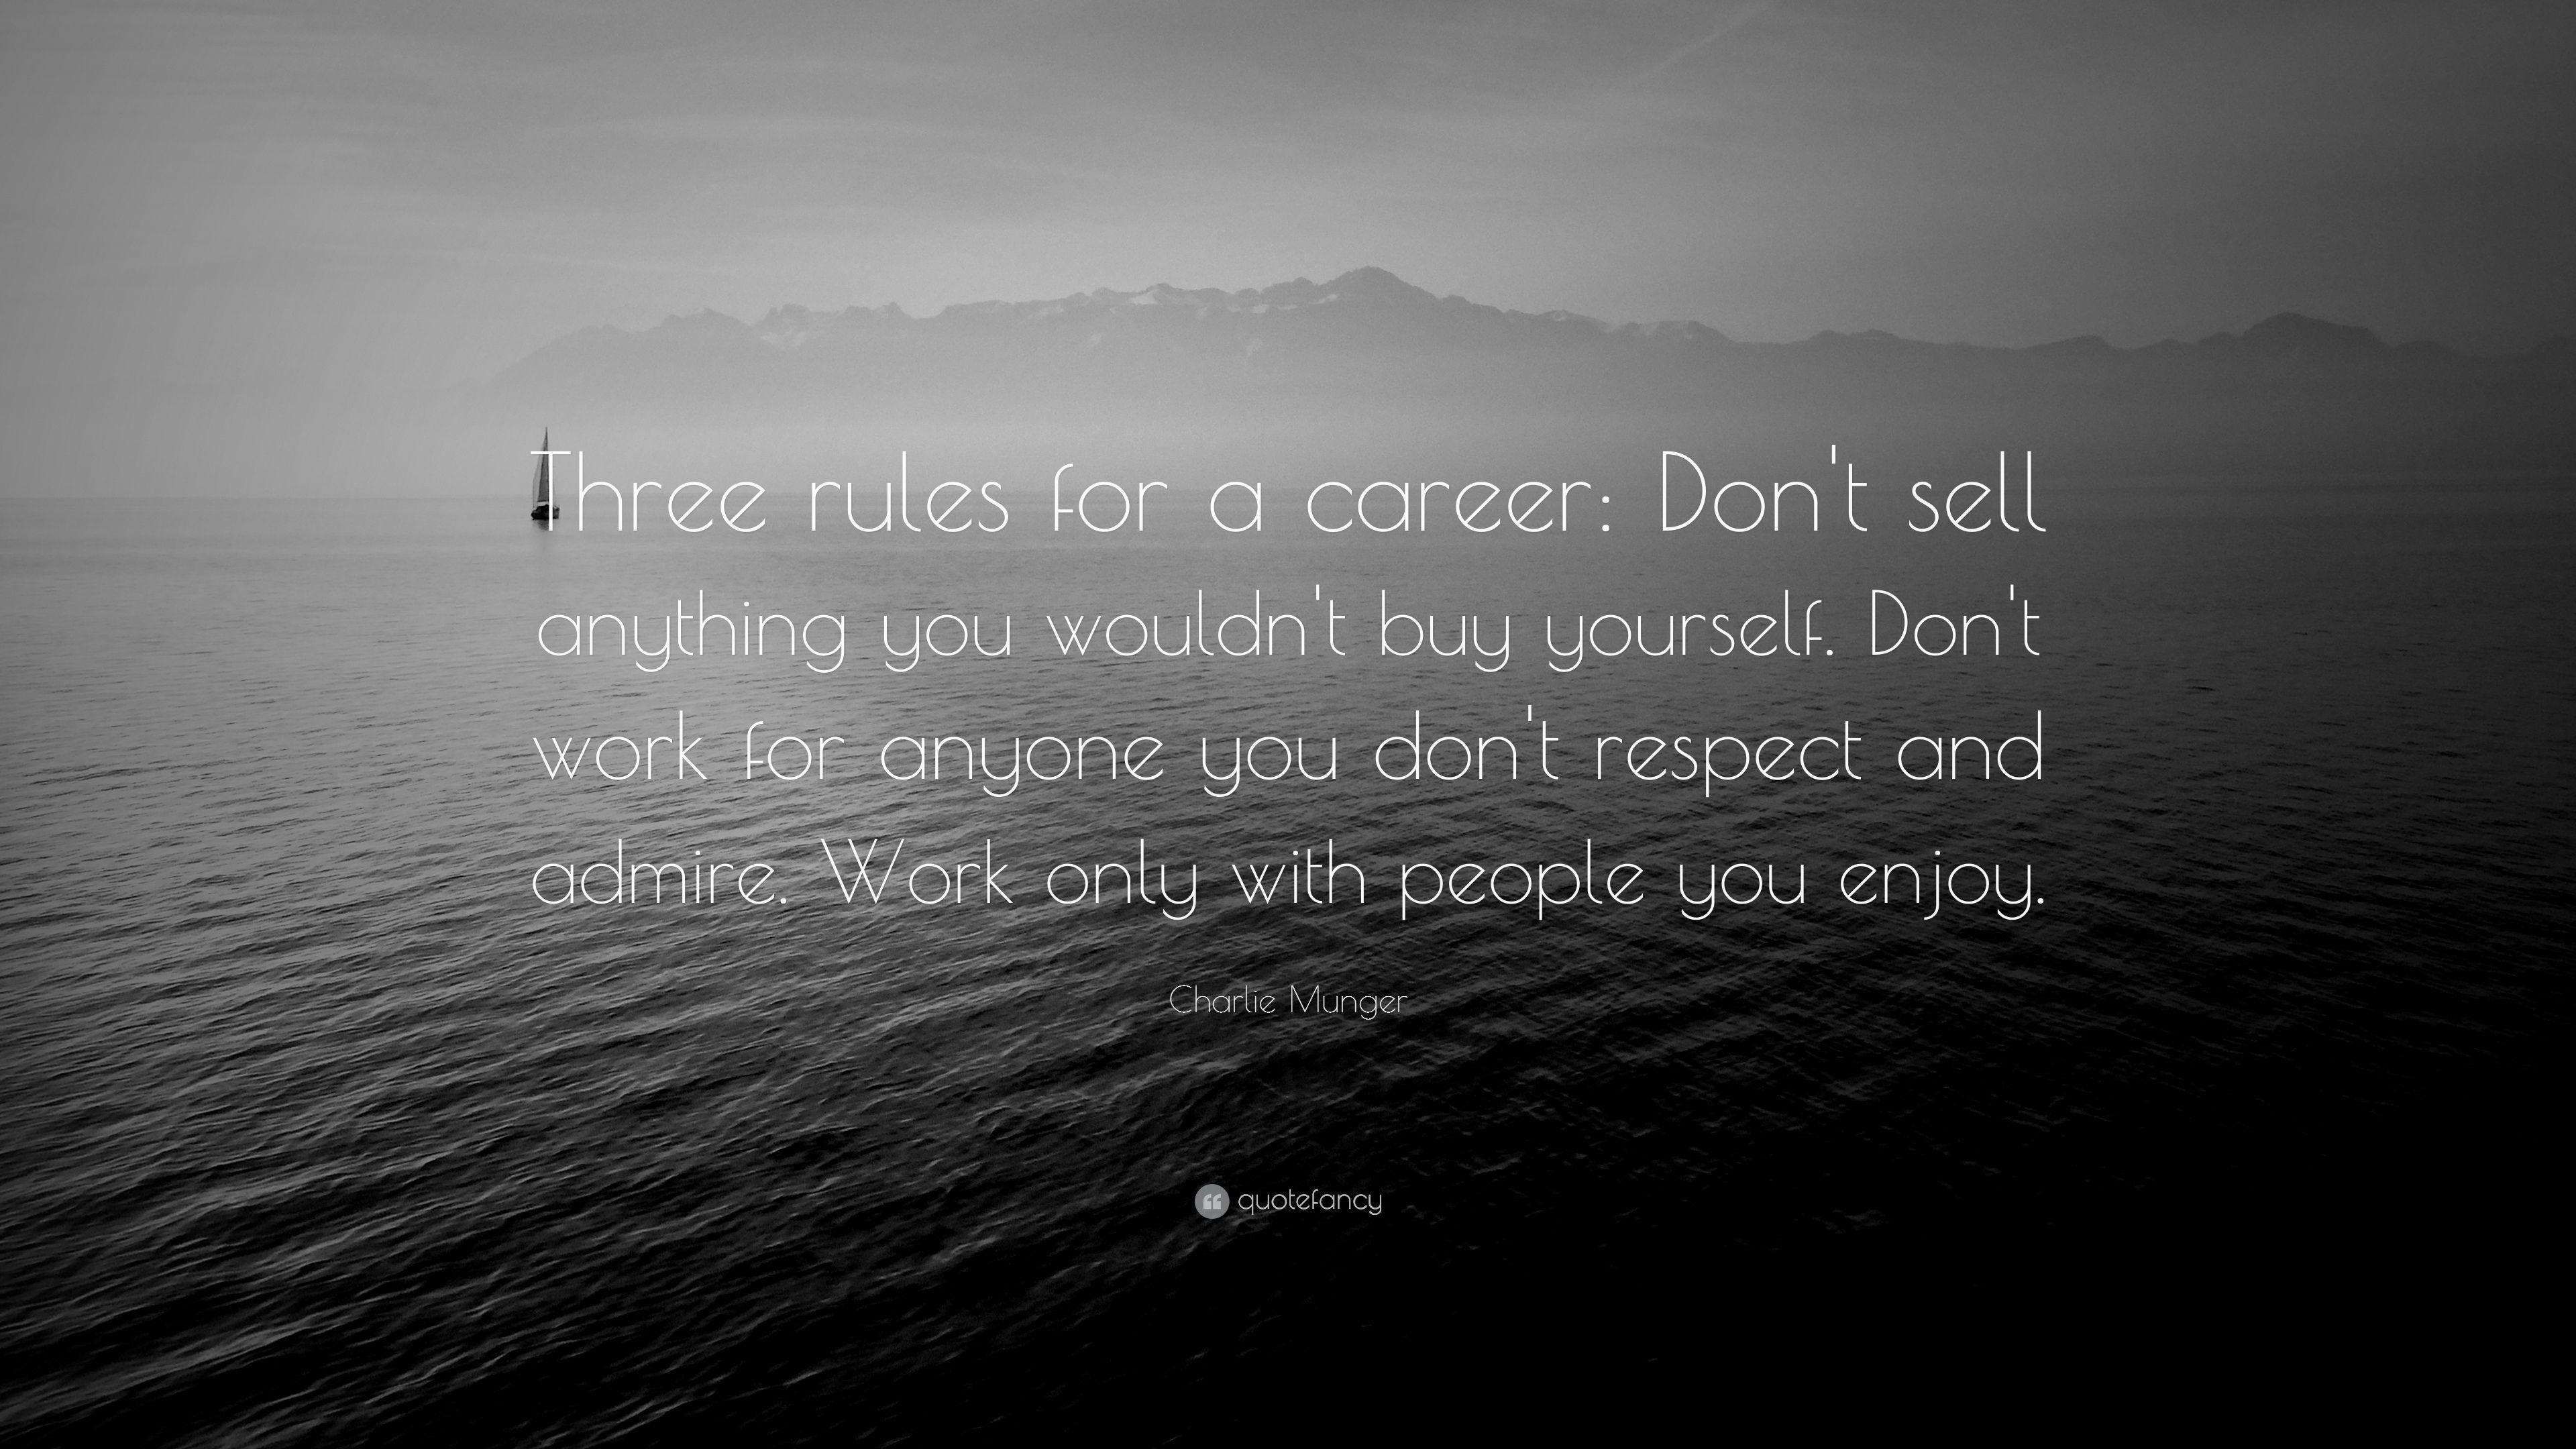 Charlie Munger Quote: “Three rules for a career: Don't sell